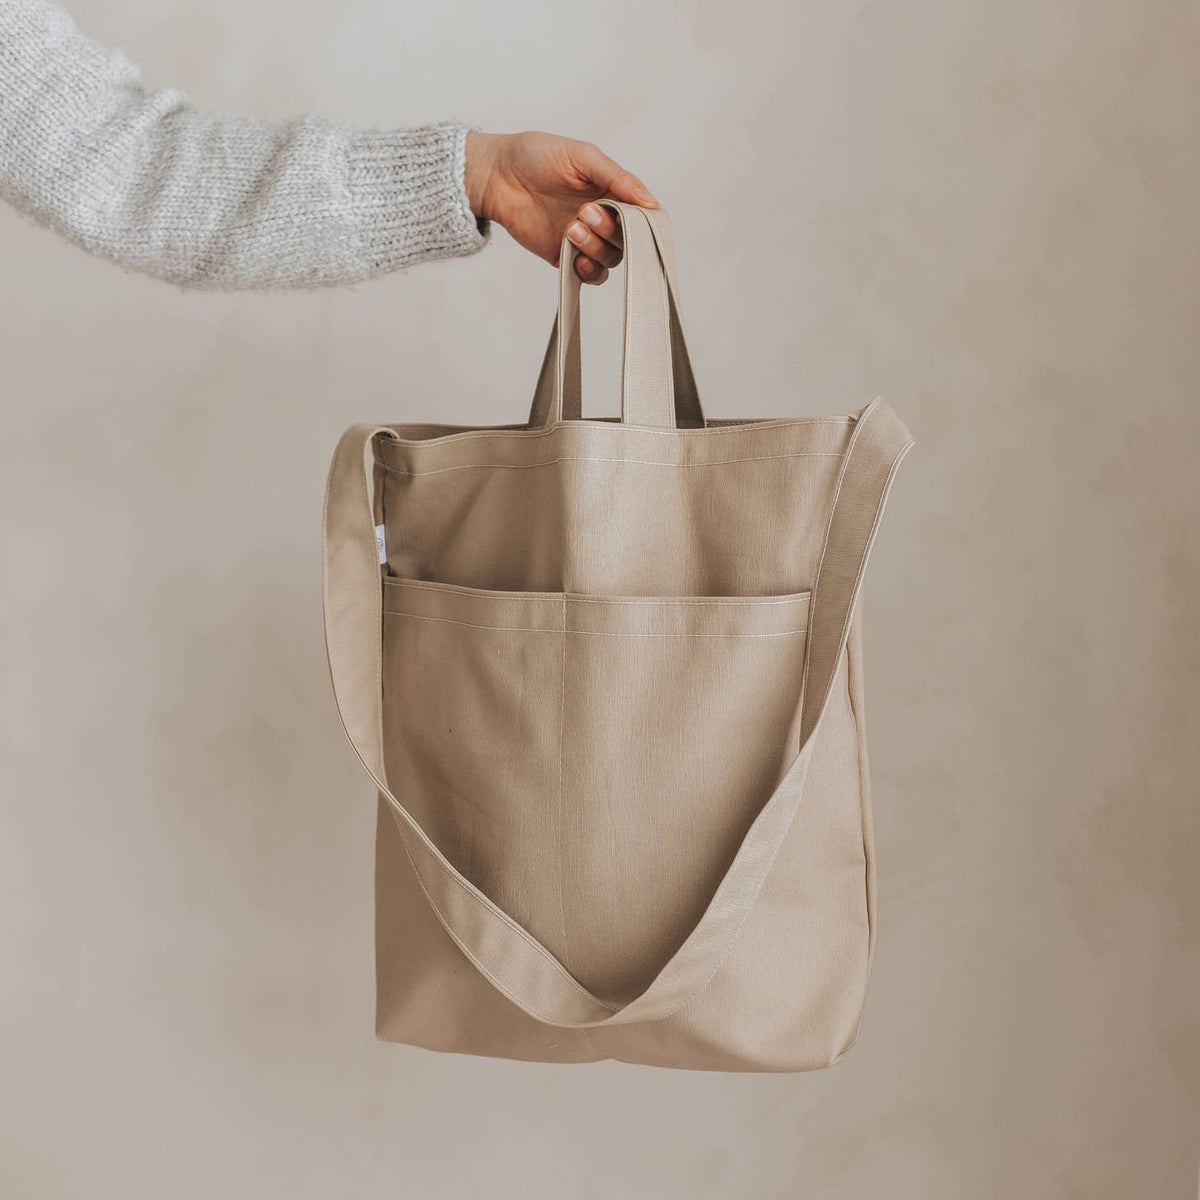 Double Pocket Tote Bag in Tan